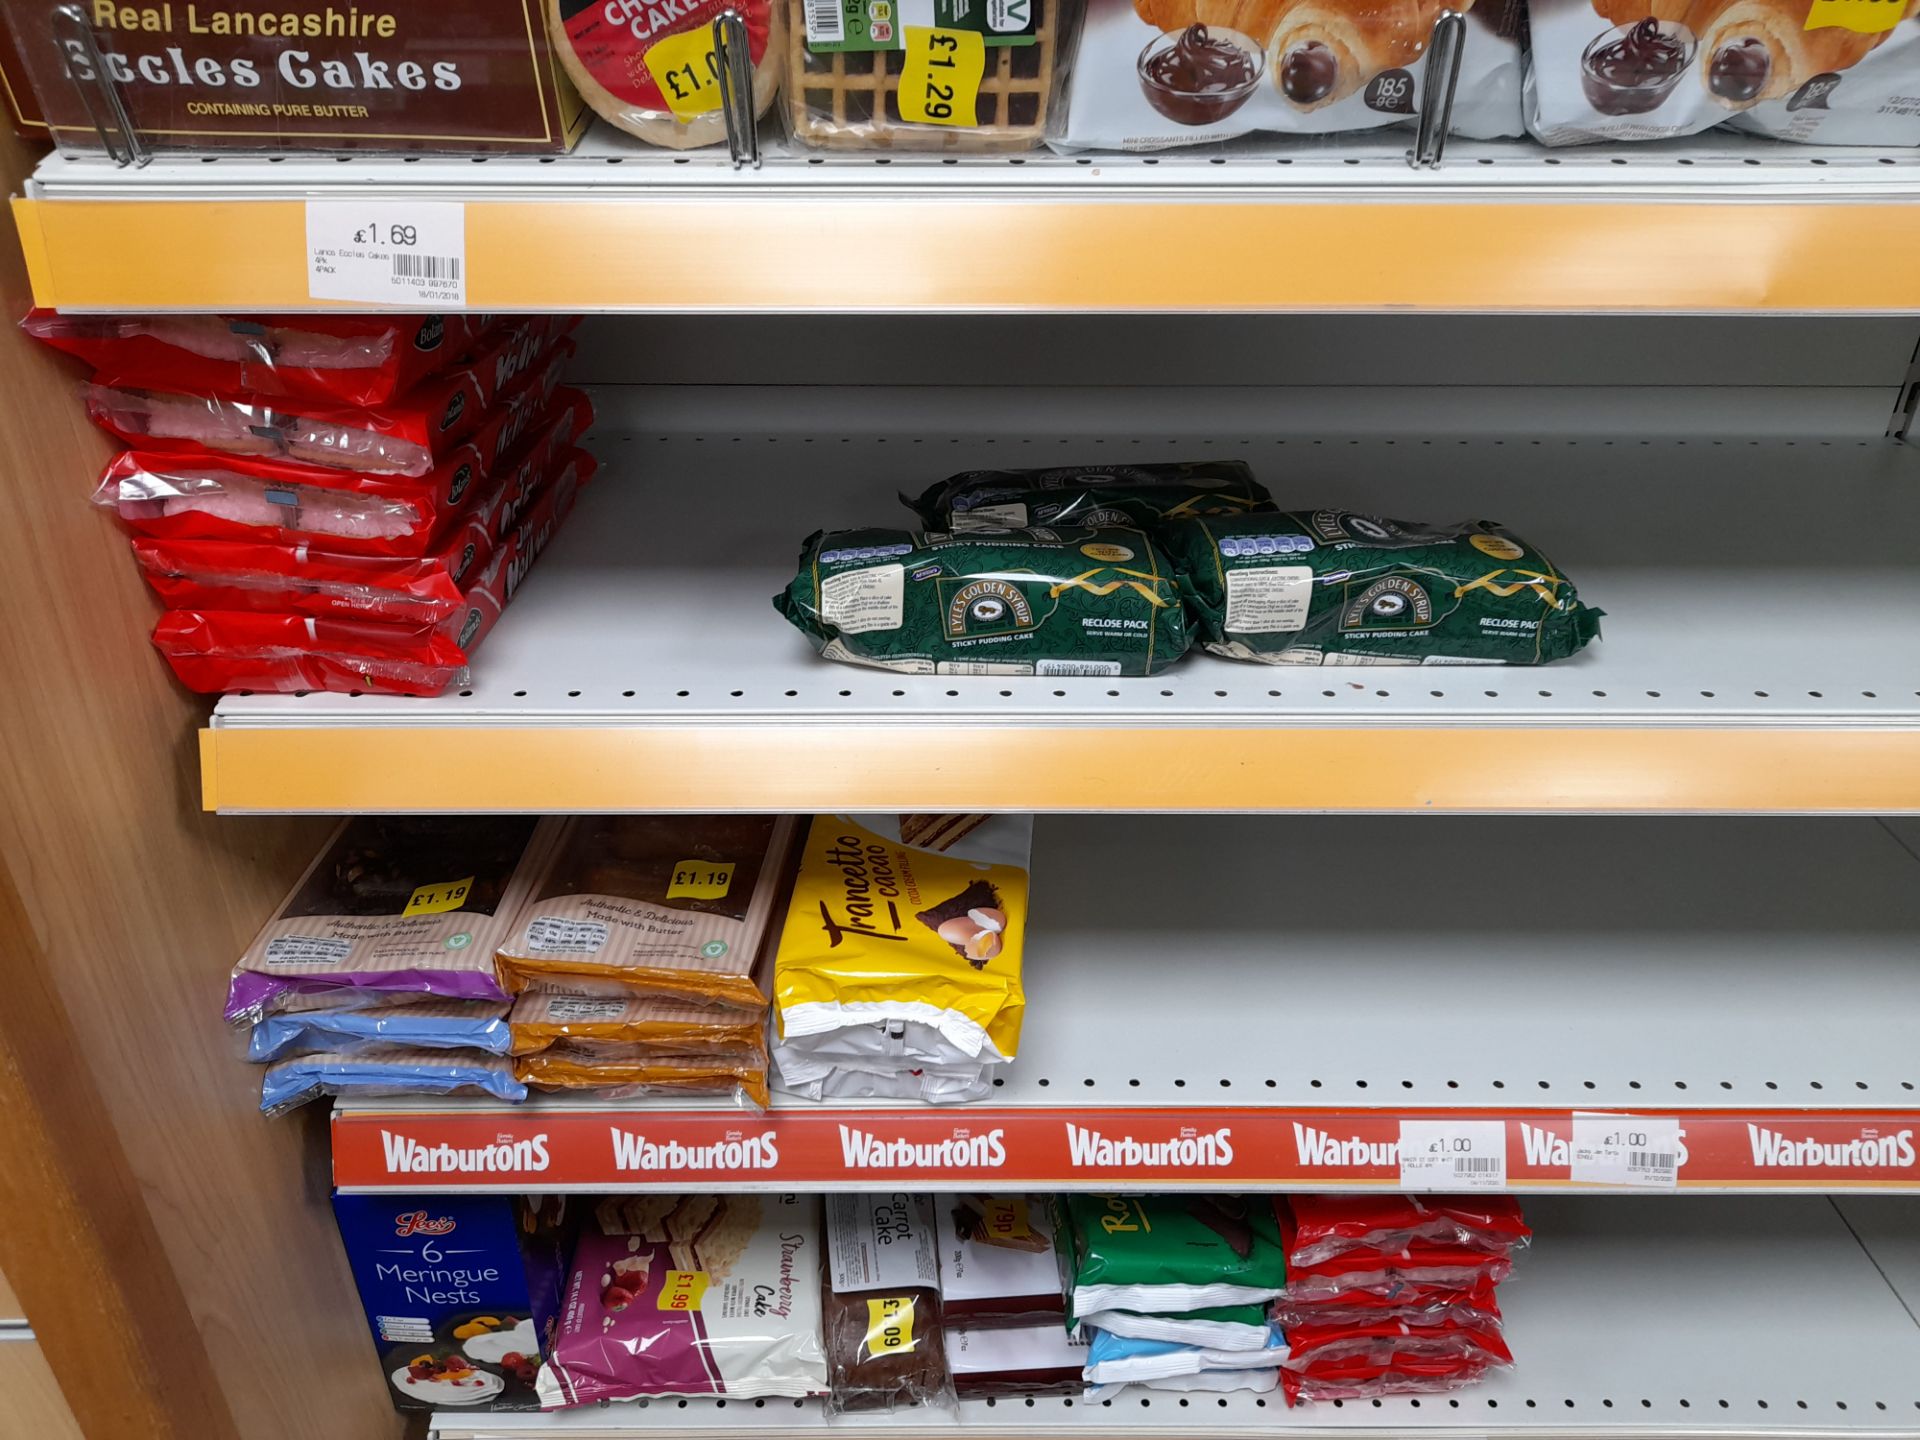 Contents to double sided shop display to include assortment of biscuits, tea bags, coffee, cakes, - Image 14 of 18